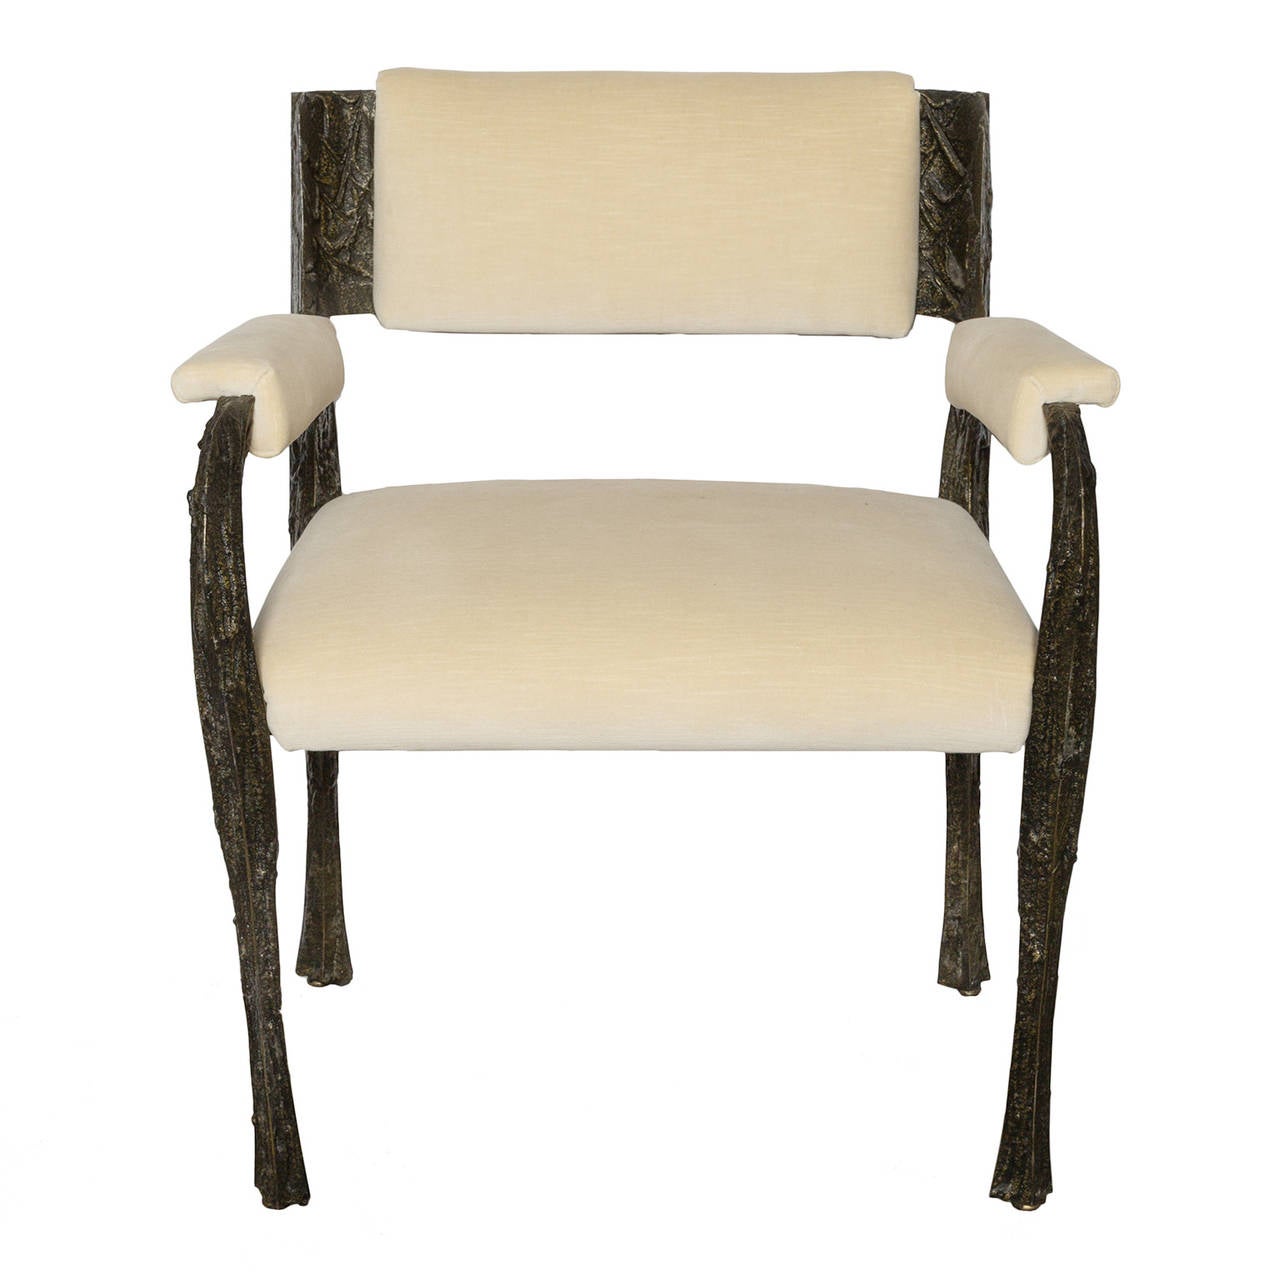 Set of six Sculpted Bronze Dining Chairs and two armchairs by Paul Evans for Directional. Forged in atomized bronze with upholstered seats and backrests, original cream colored velvet.

Armchairs dimensions: W 61 cm - D 61 cm - H 81 cm
Dining